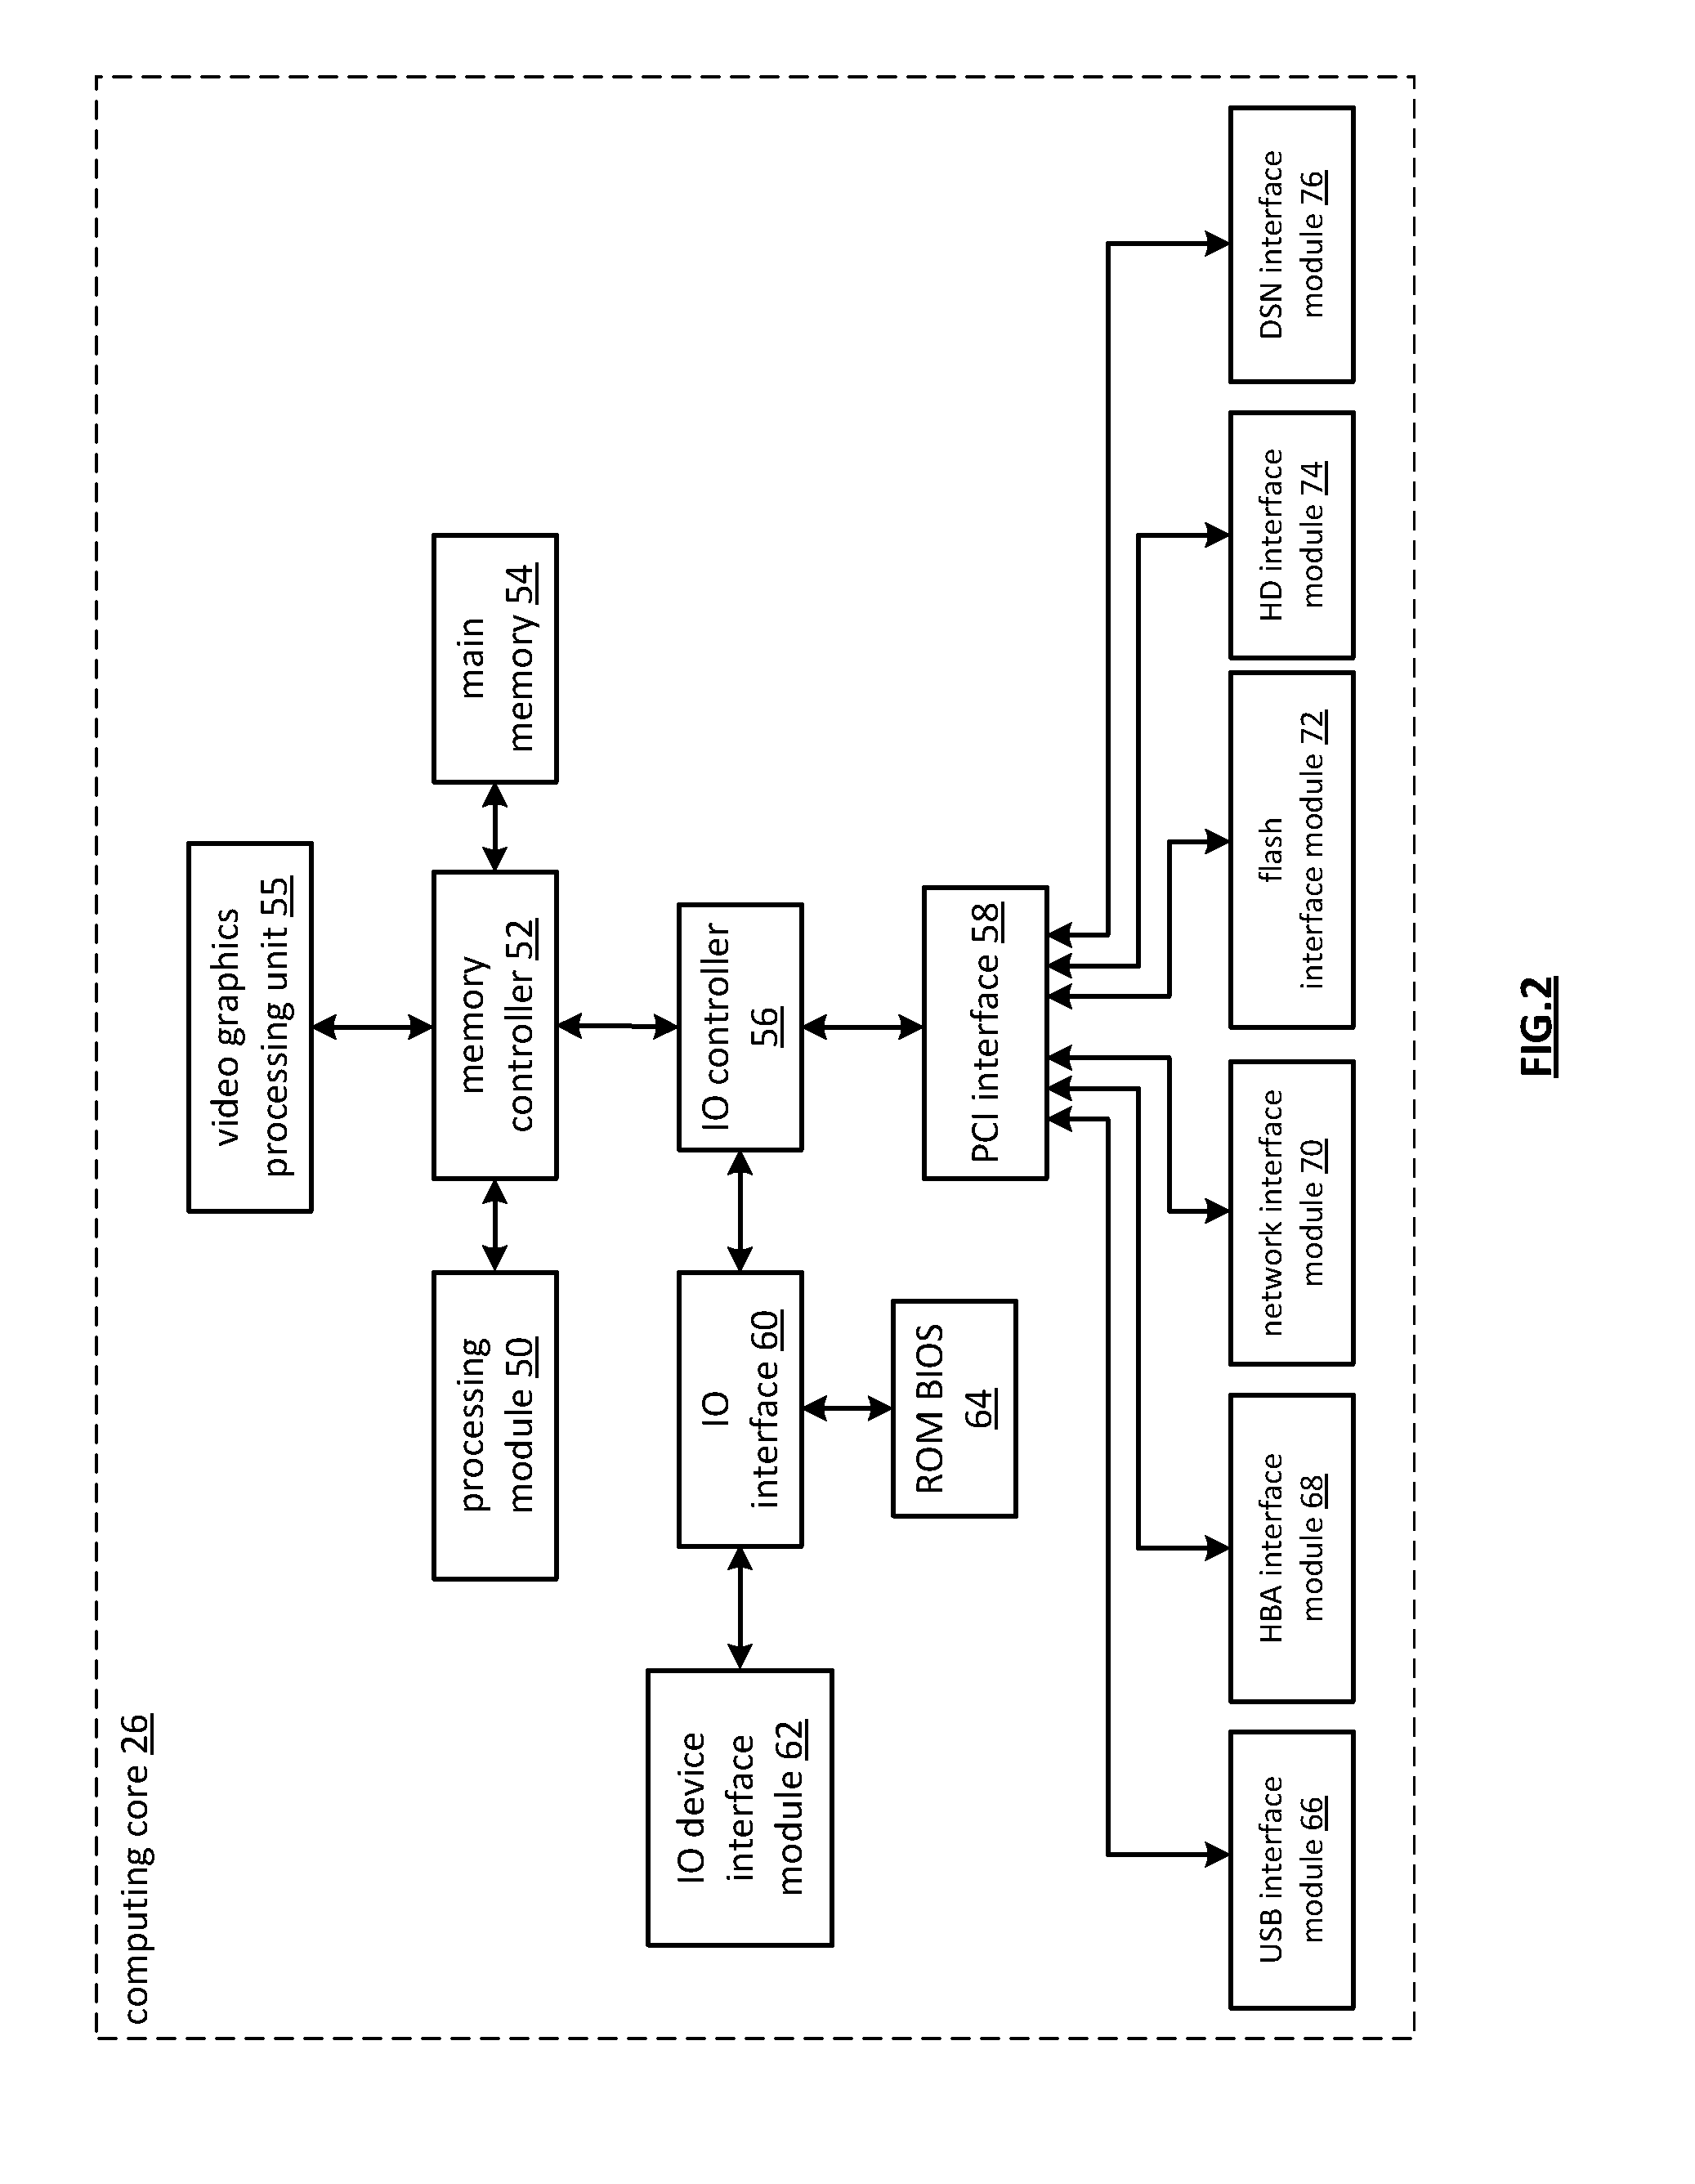 Dispersed storage network file system directory